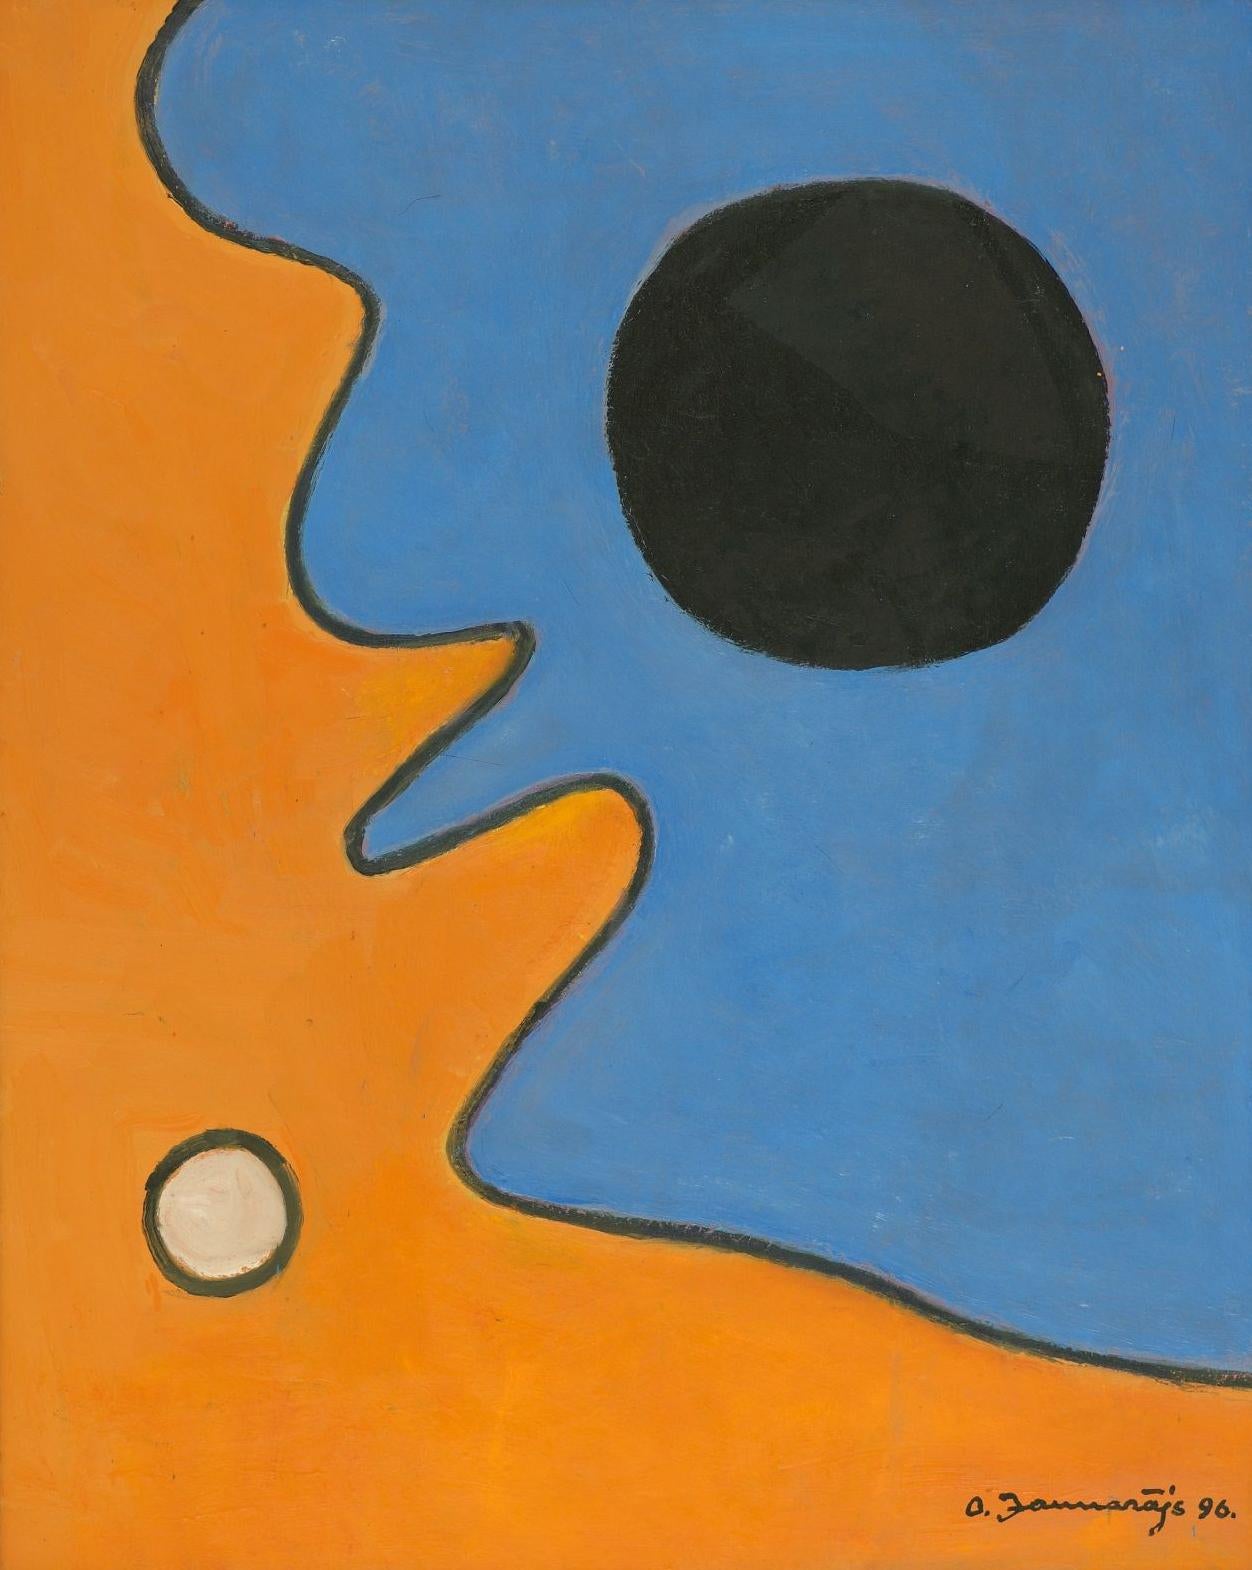 Olgerts Jaunarajs Abstract Painting - Composition 7. 1996, oil on board, 81x65 cm